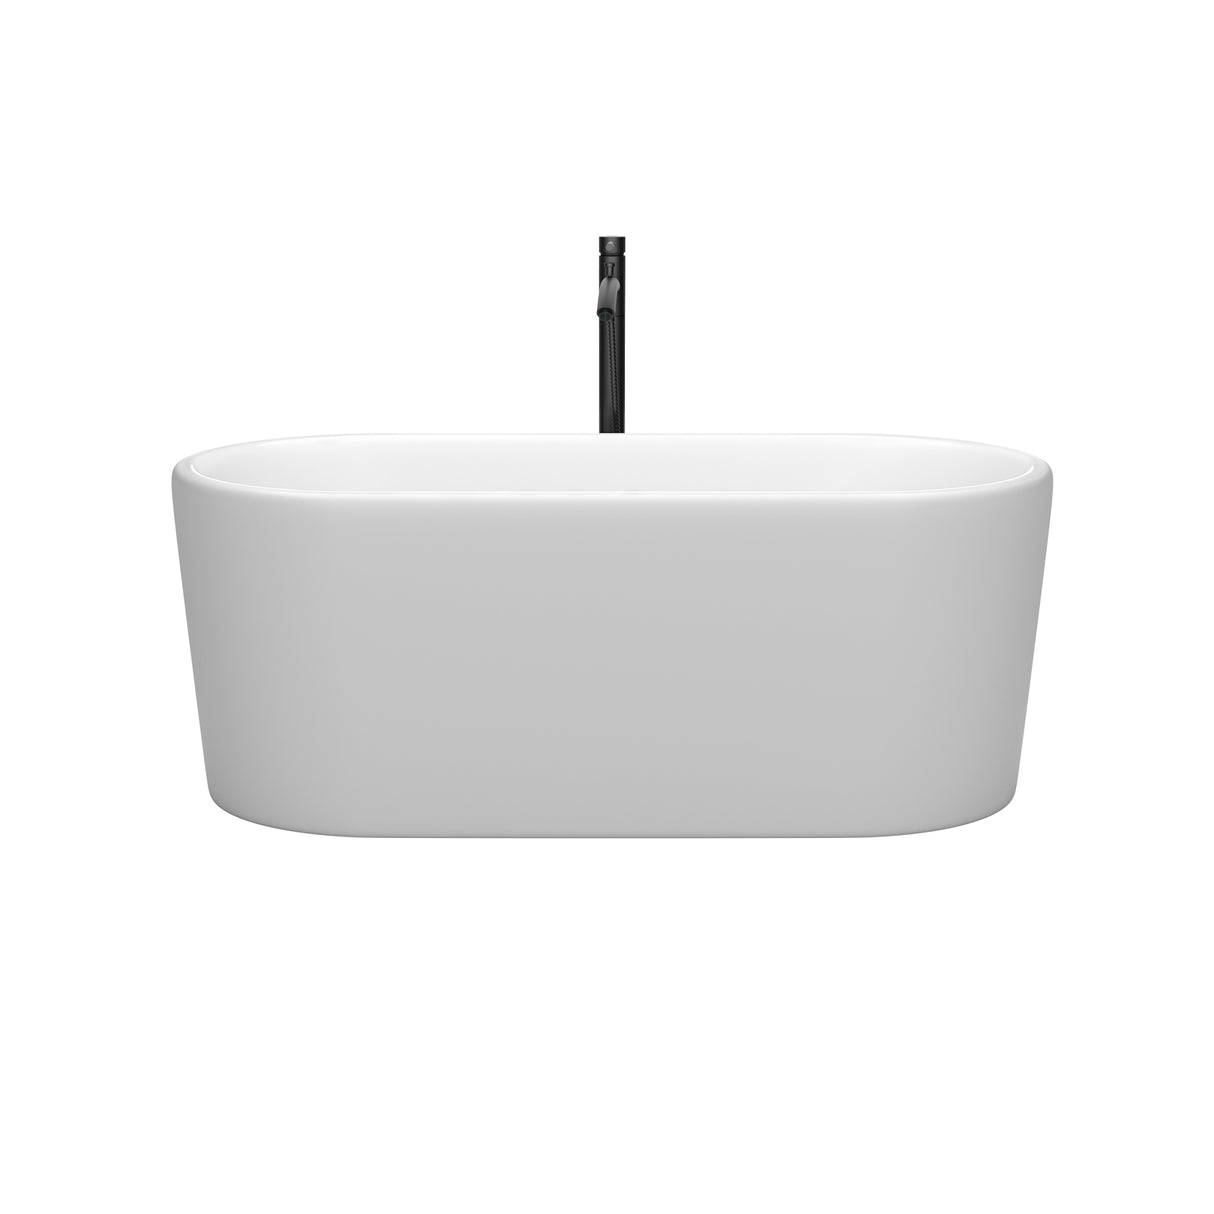 Ursula 59 Inch Freestanding Bathtub in Matte White with Shiny White Trim and Floor Mounted Faucet in Matte Black